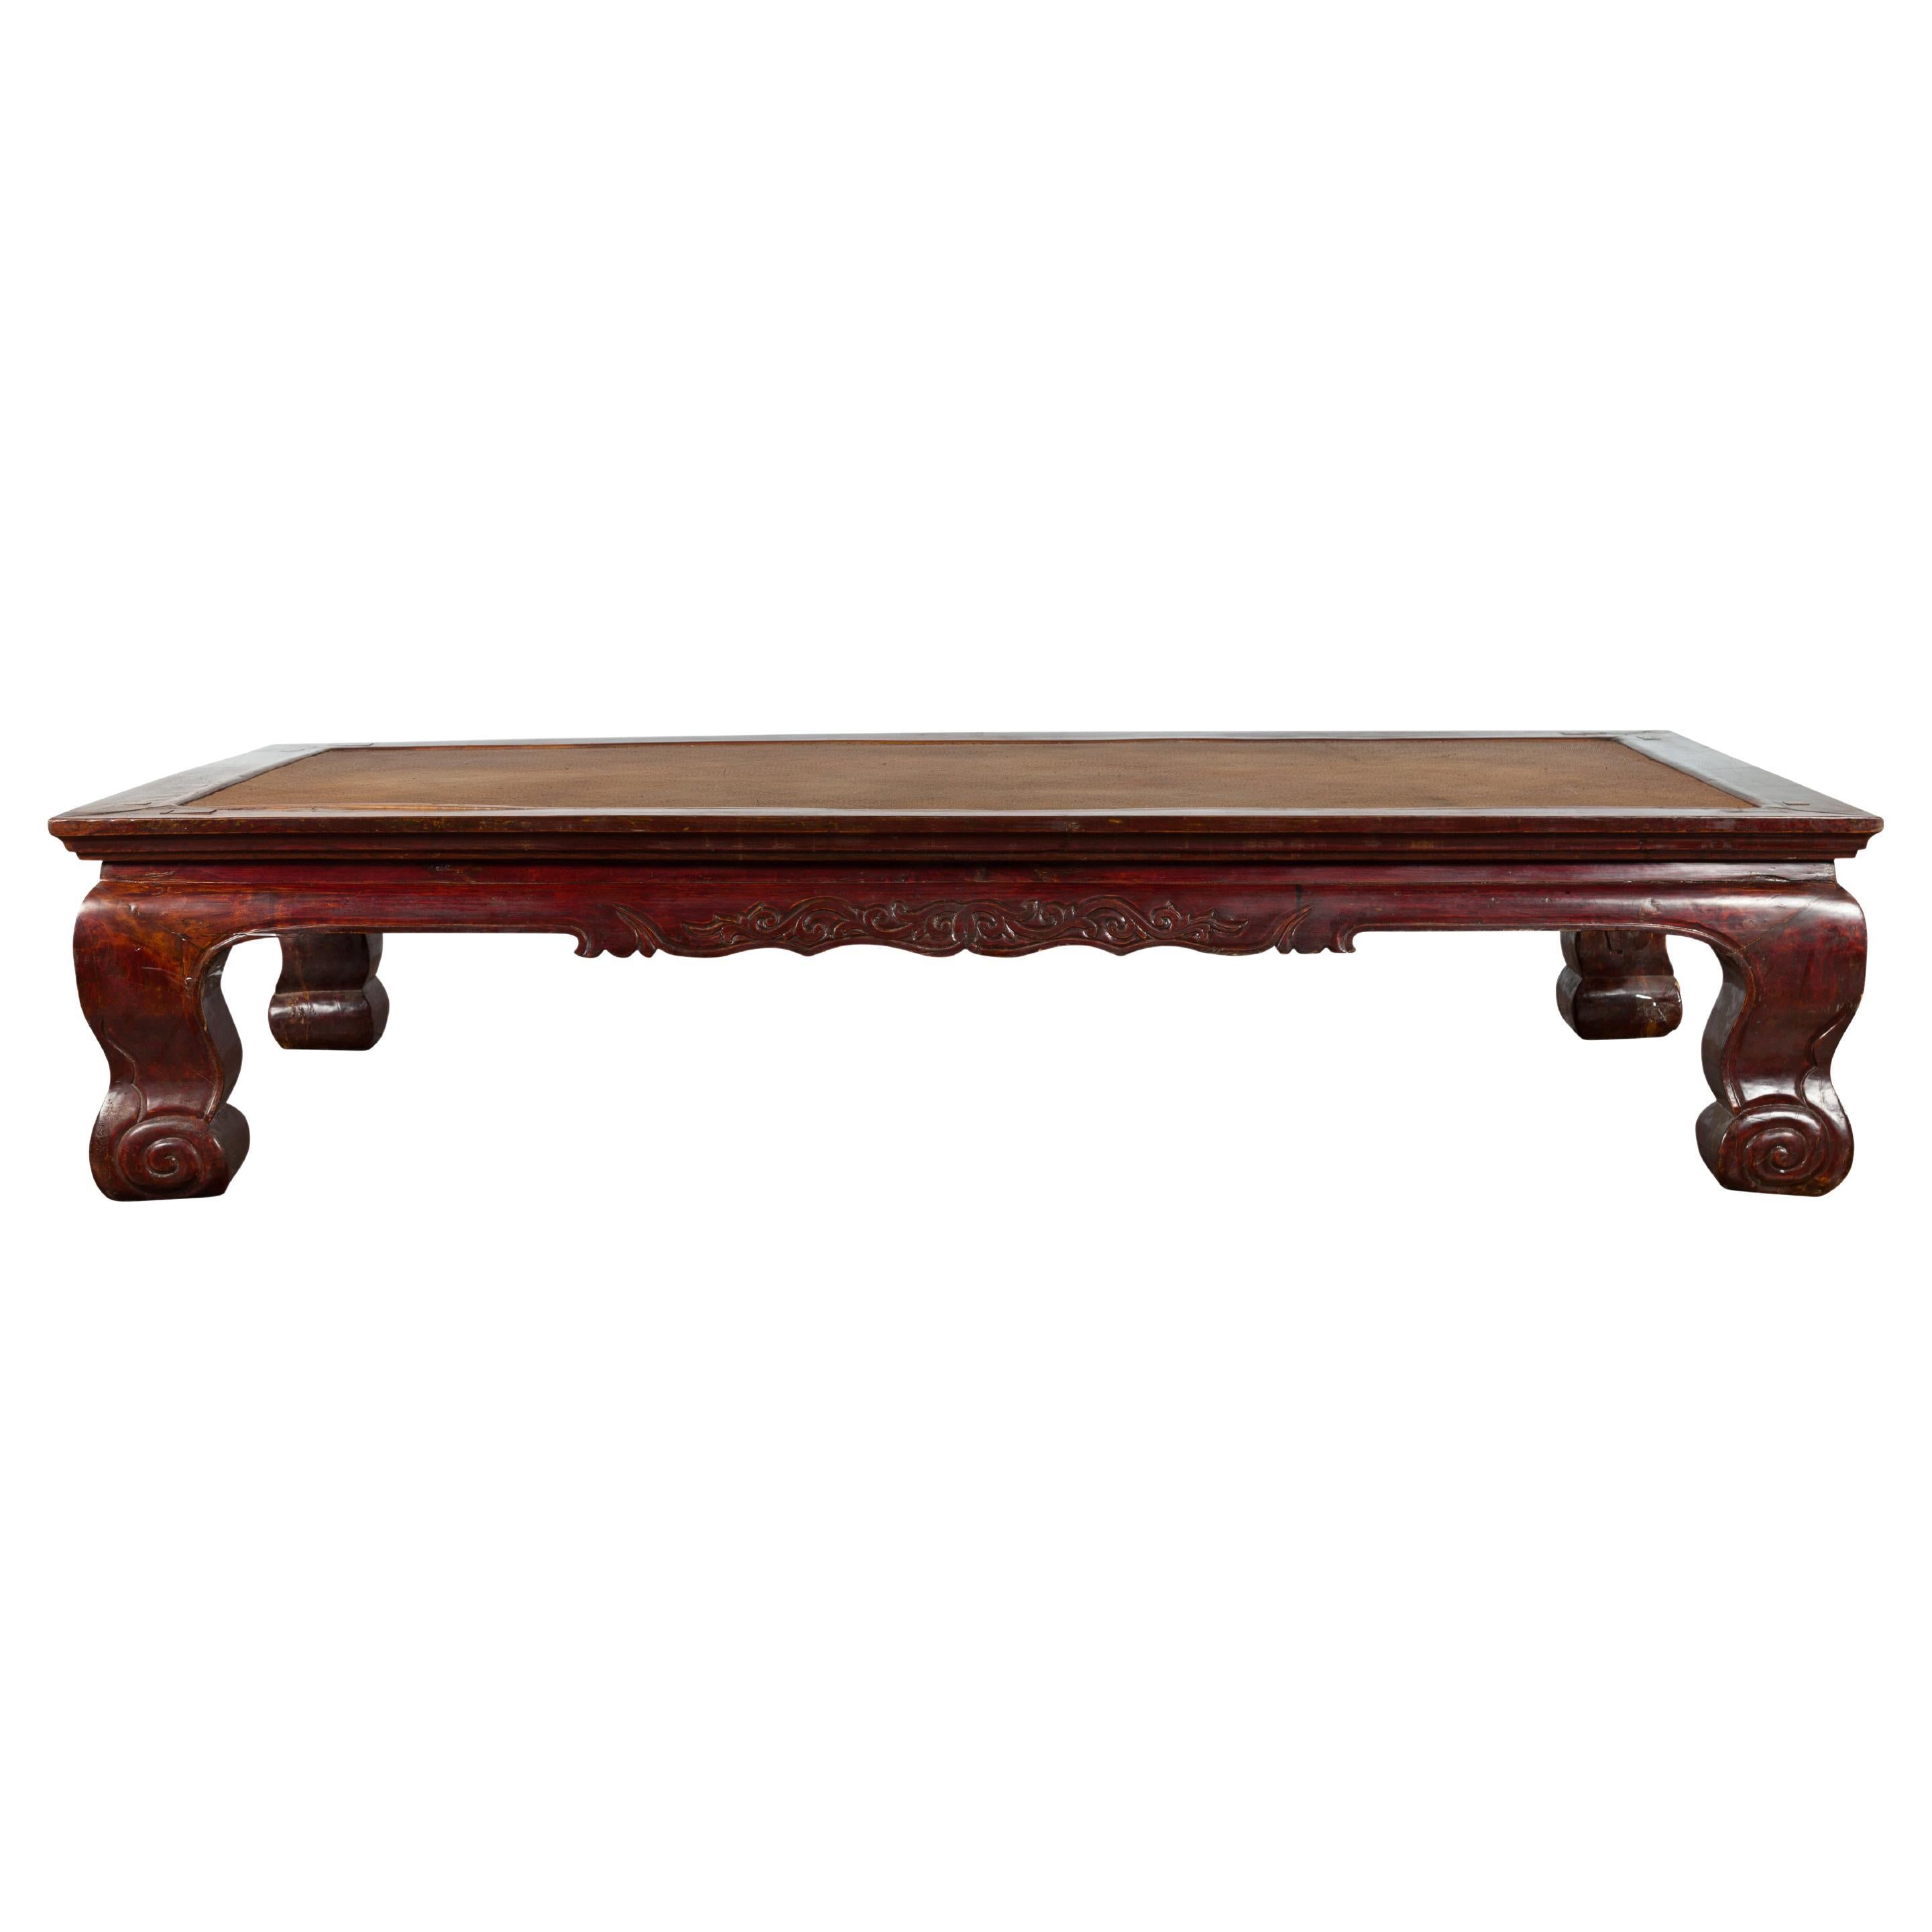 Chinese Qing Dynasty 19th Century Mahogany Stained Coffee Table with Rattan Top For Sale